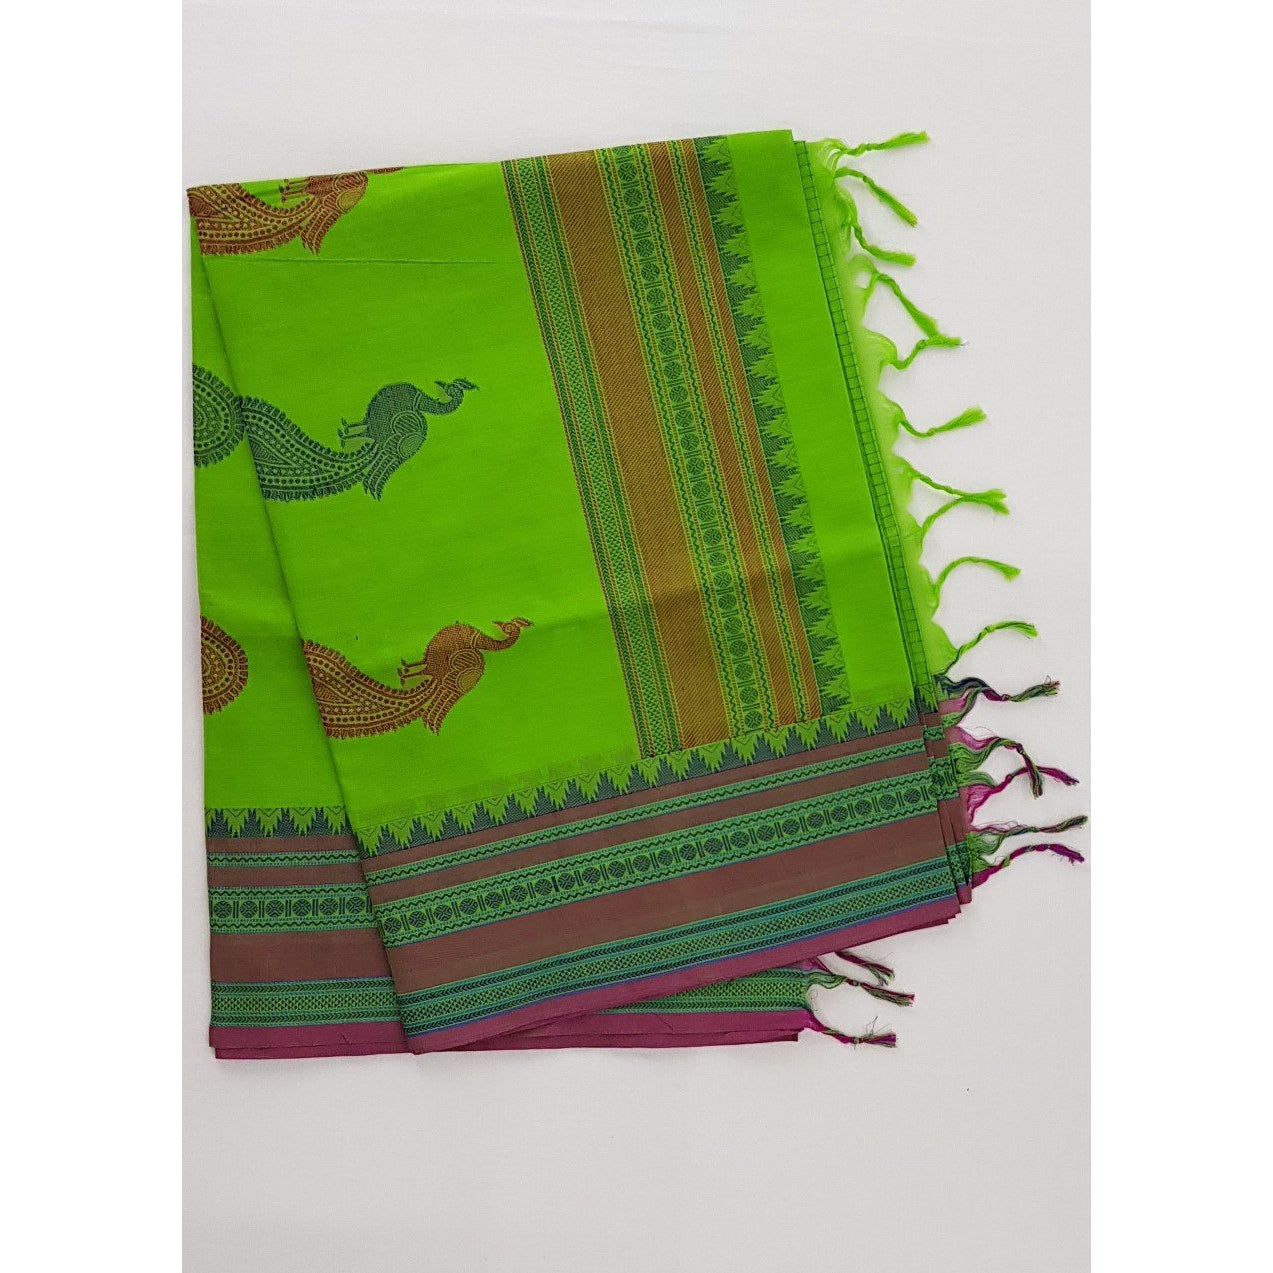 Parrot Green and Pink Color Kanchi cotton saree with thread border and Rich Pallu - Vinshika